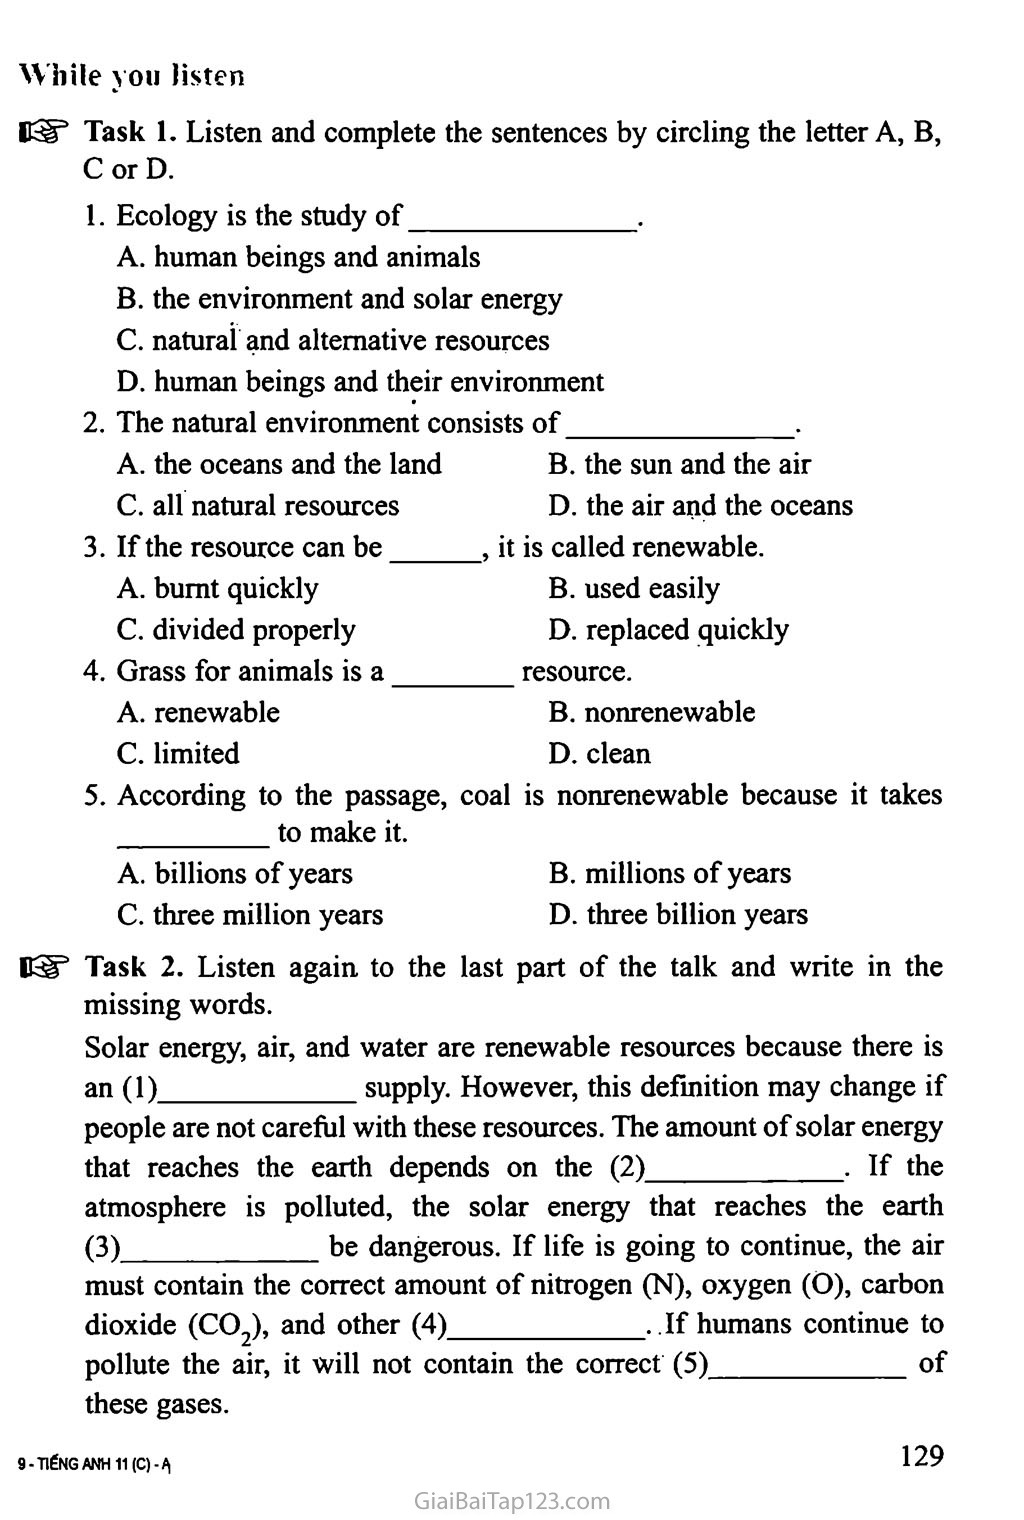 Unit 11: SOURCES OF ENERGY trang 6